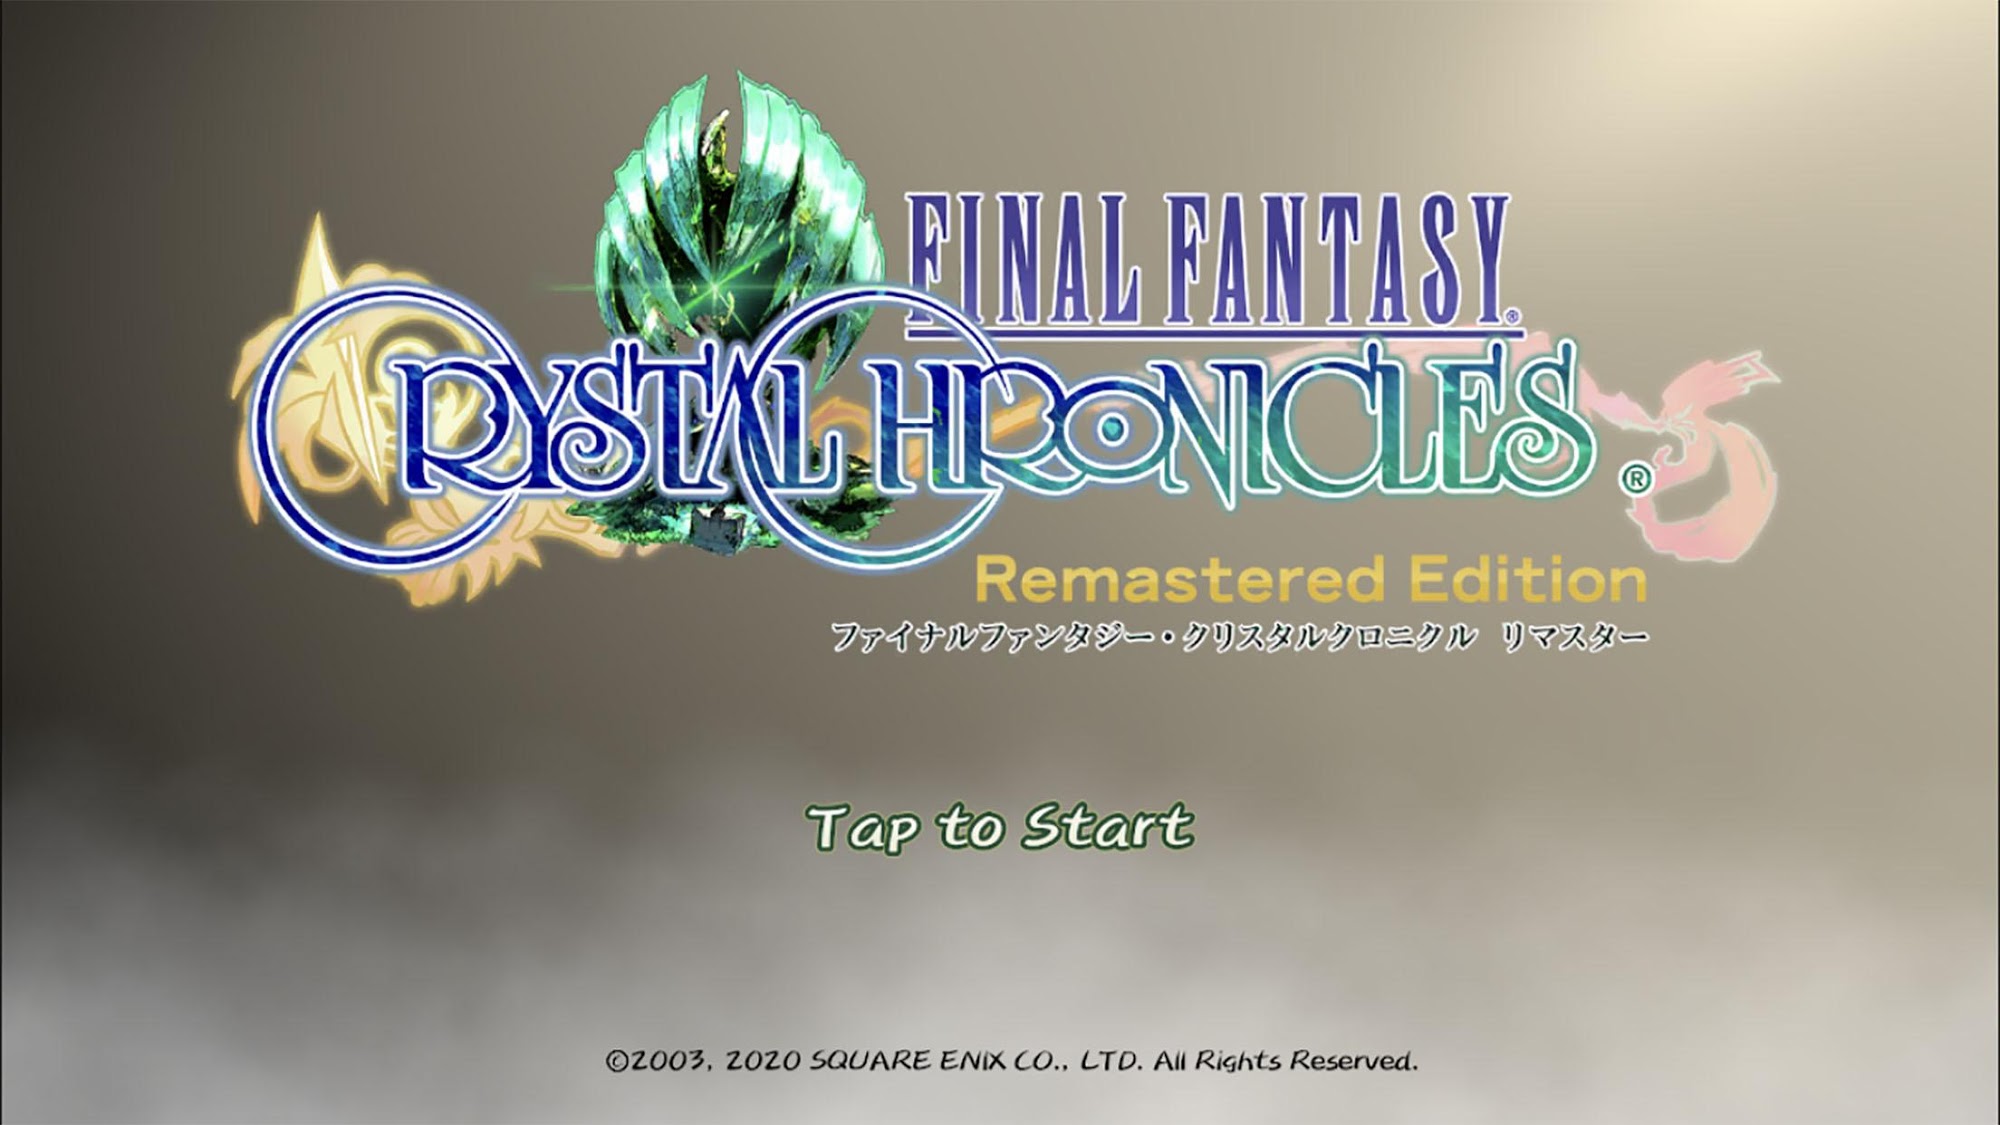 FINALFANTASY CRYSTALCHRONICLES for Android